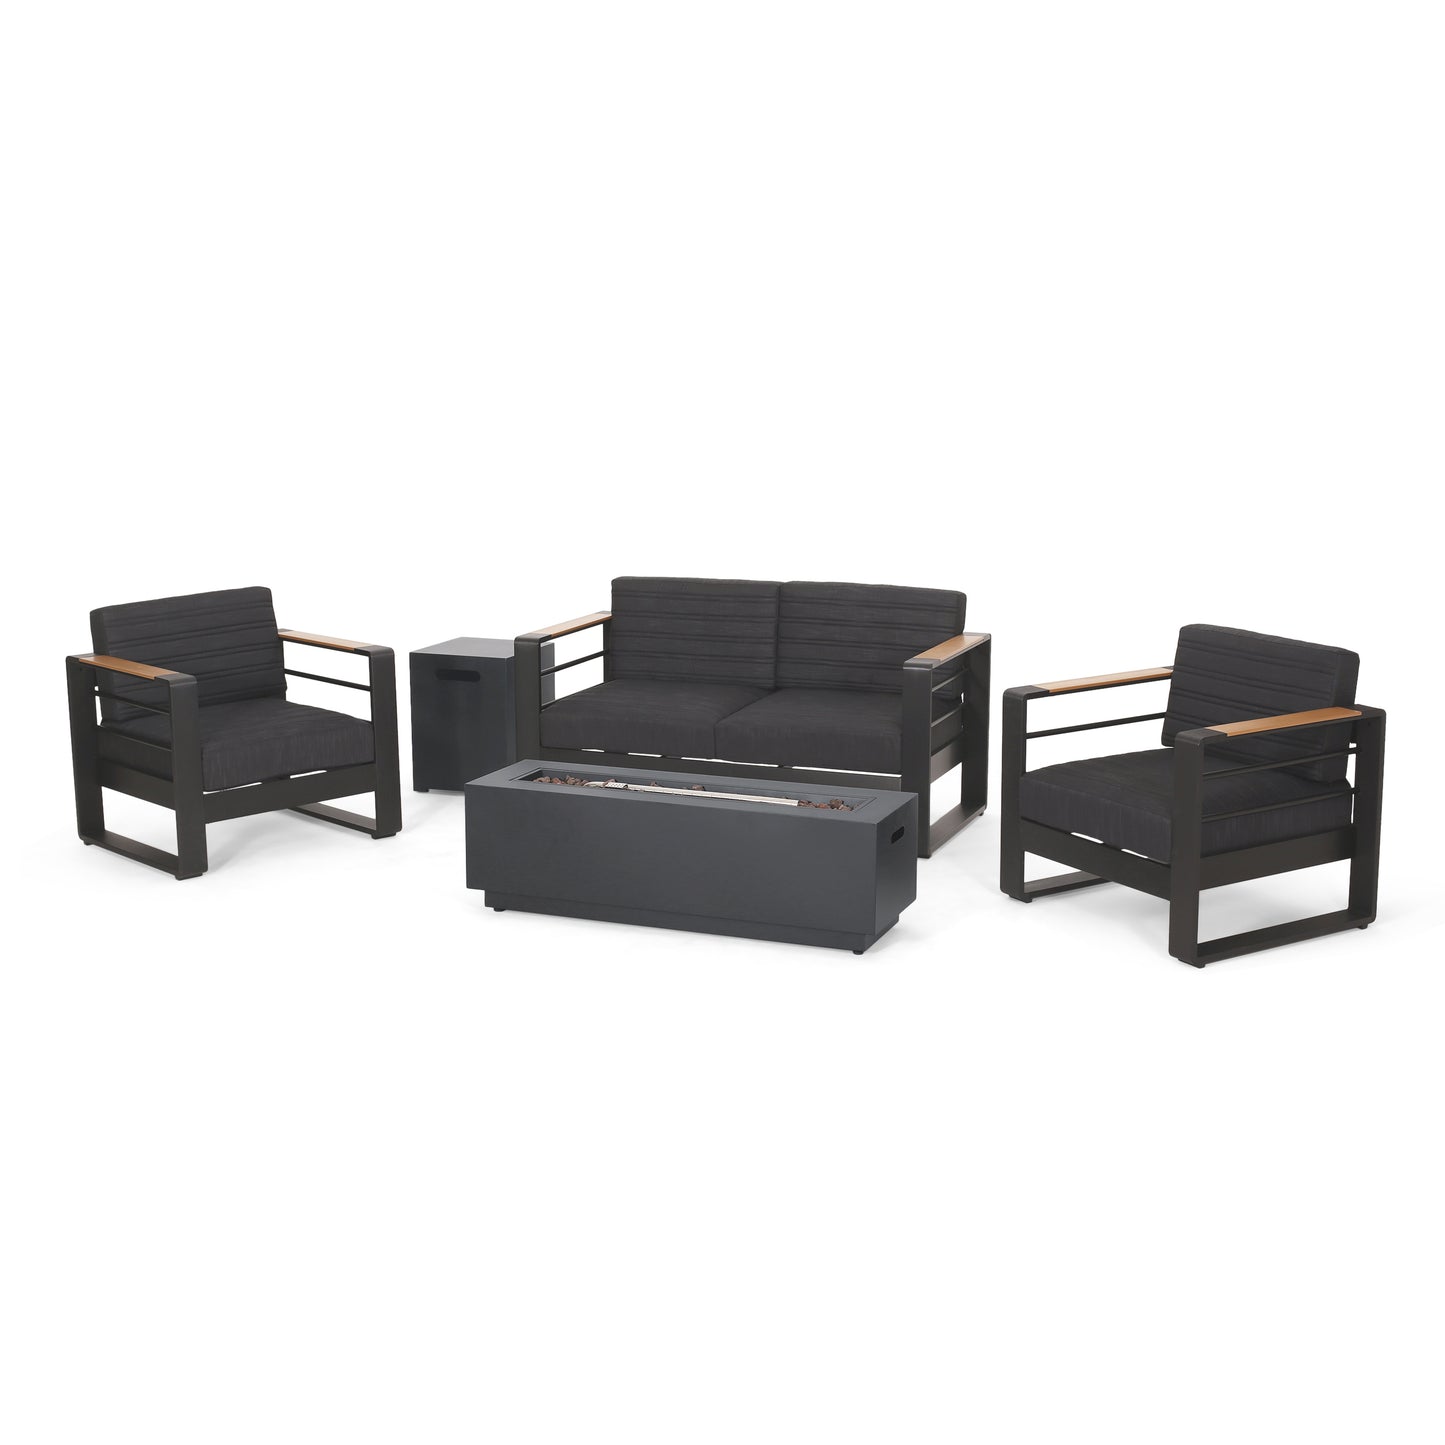 Hooven Outdoor Aluminum 4 Seater Chat Set with Fire Pit, Black, Natural, and Dark Gray